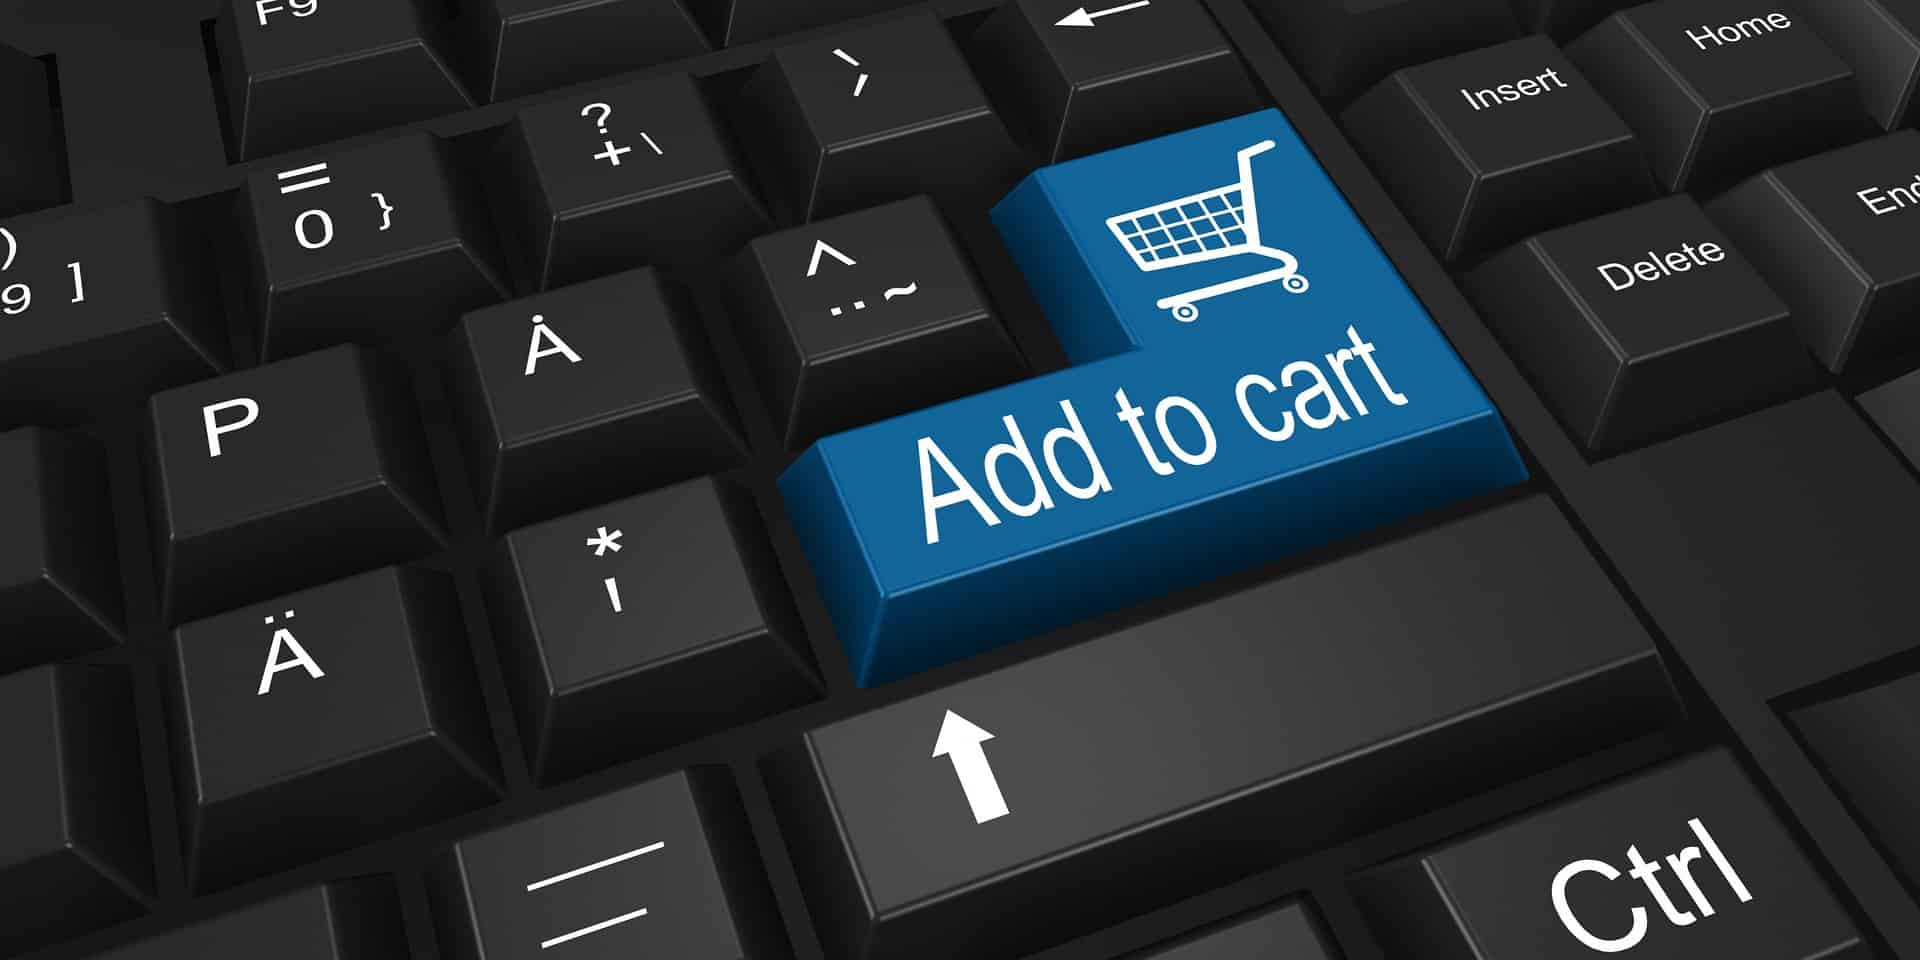 Keyboard with shopping cart icon